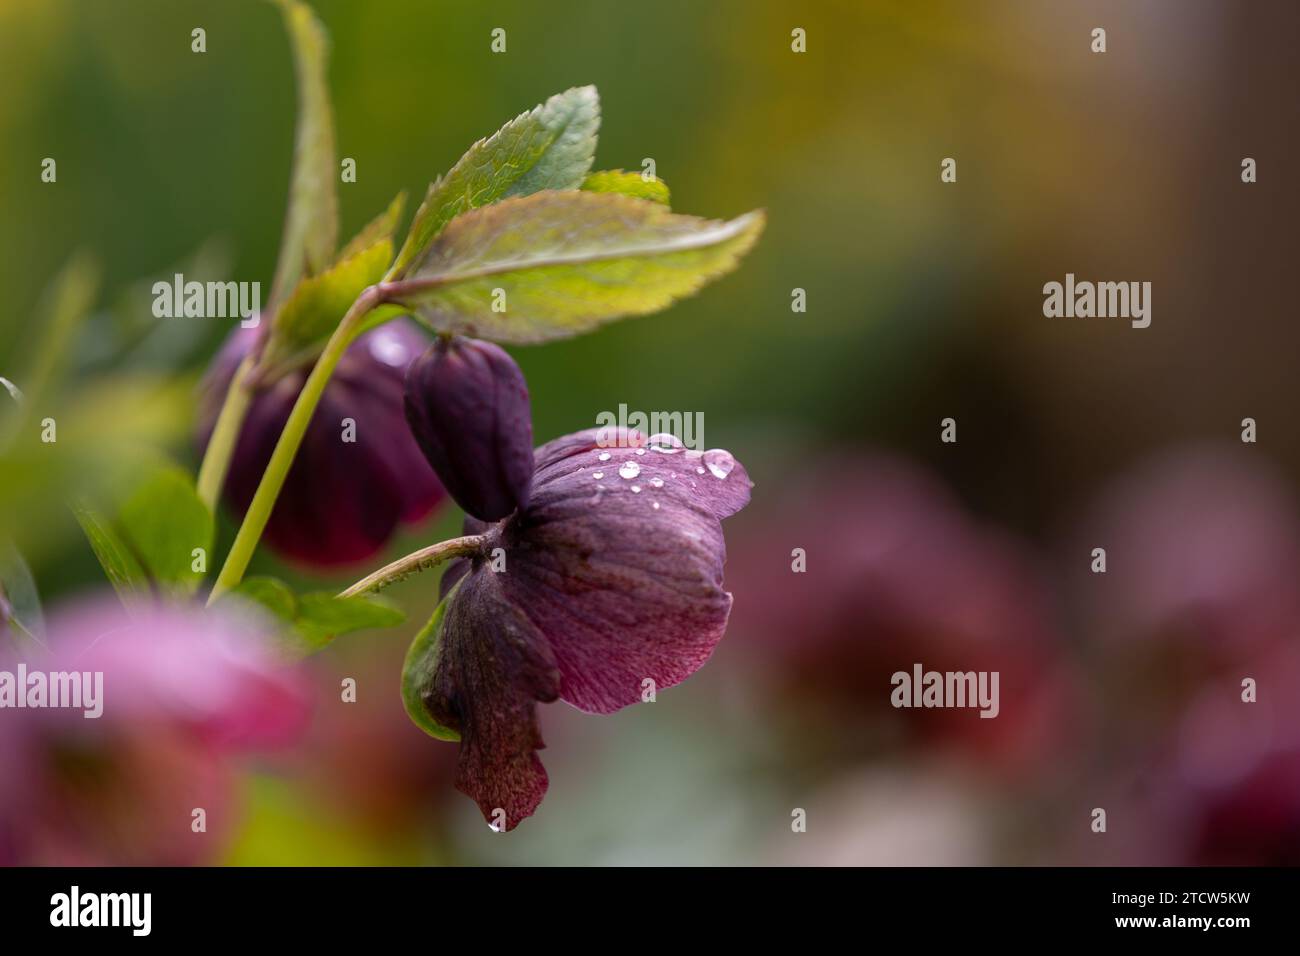 Close-up of a purple Christmas rose (Helleborus niger) with blurred background Stock Photo